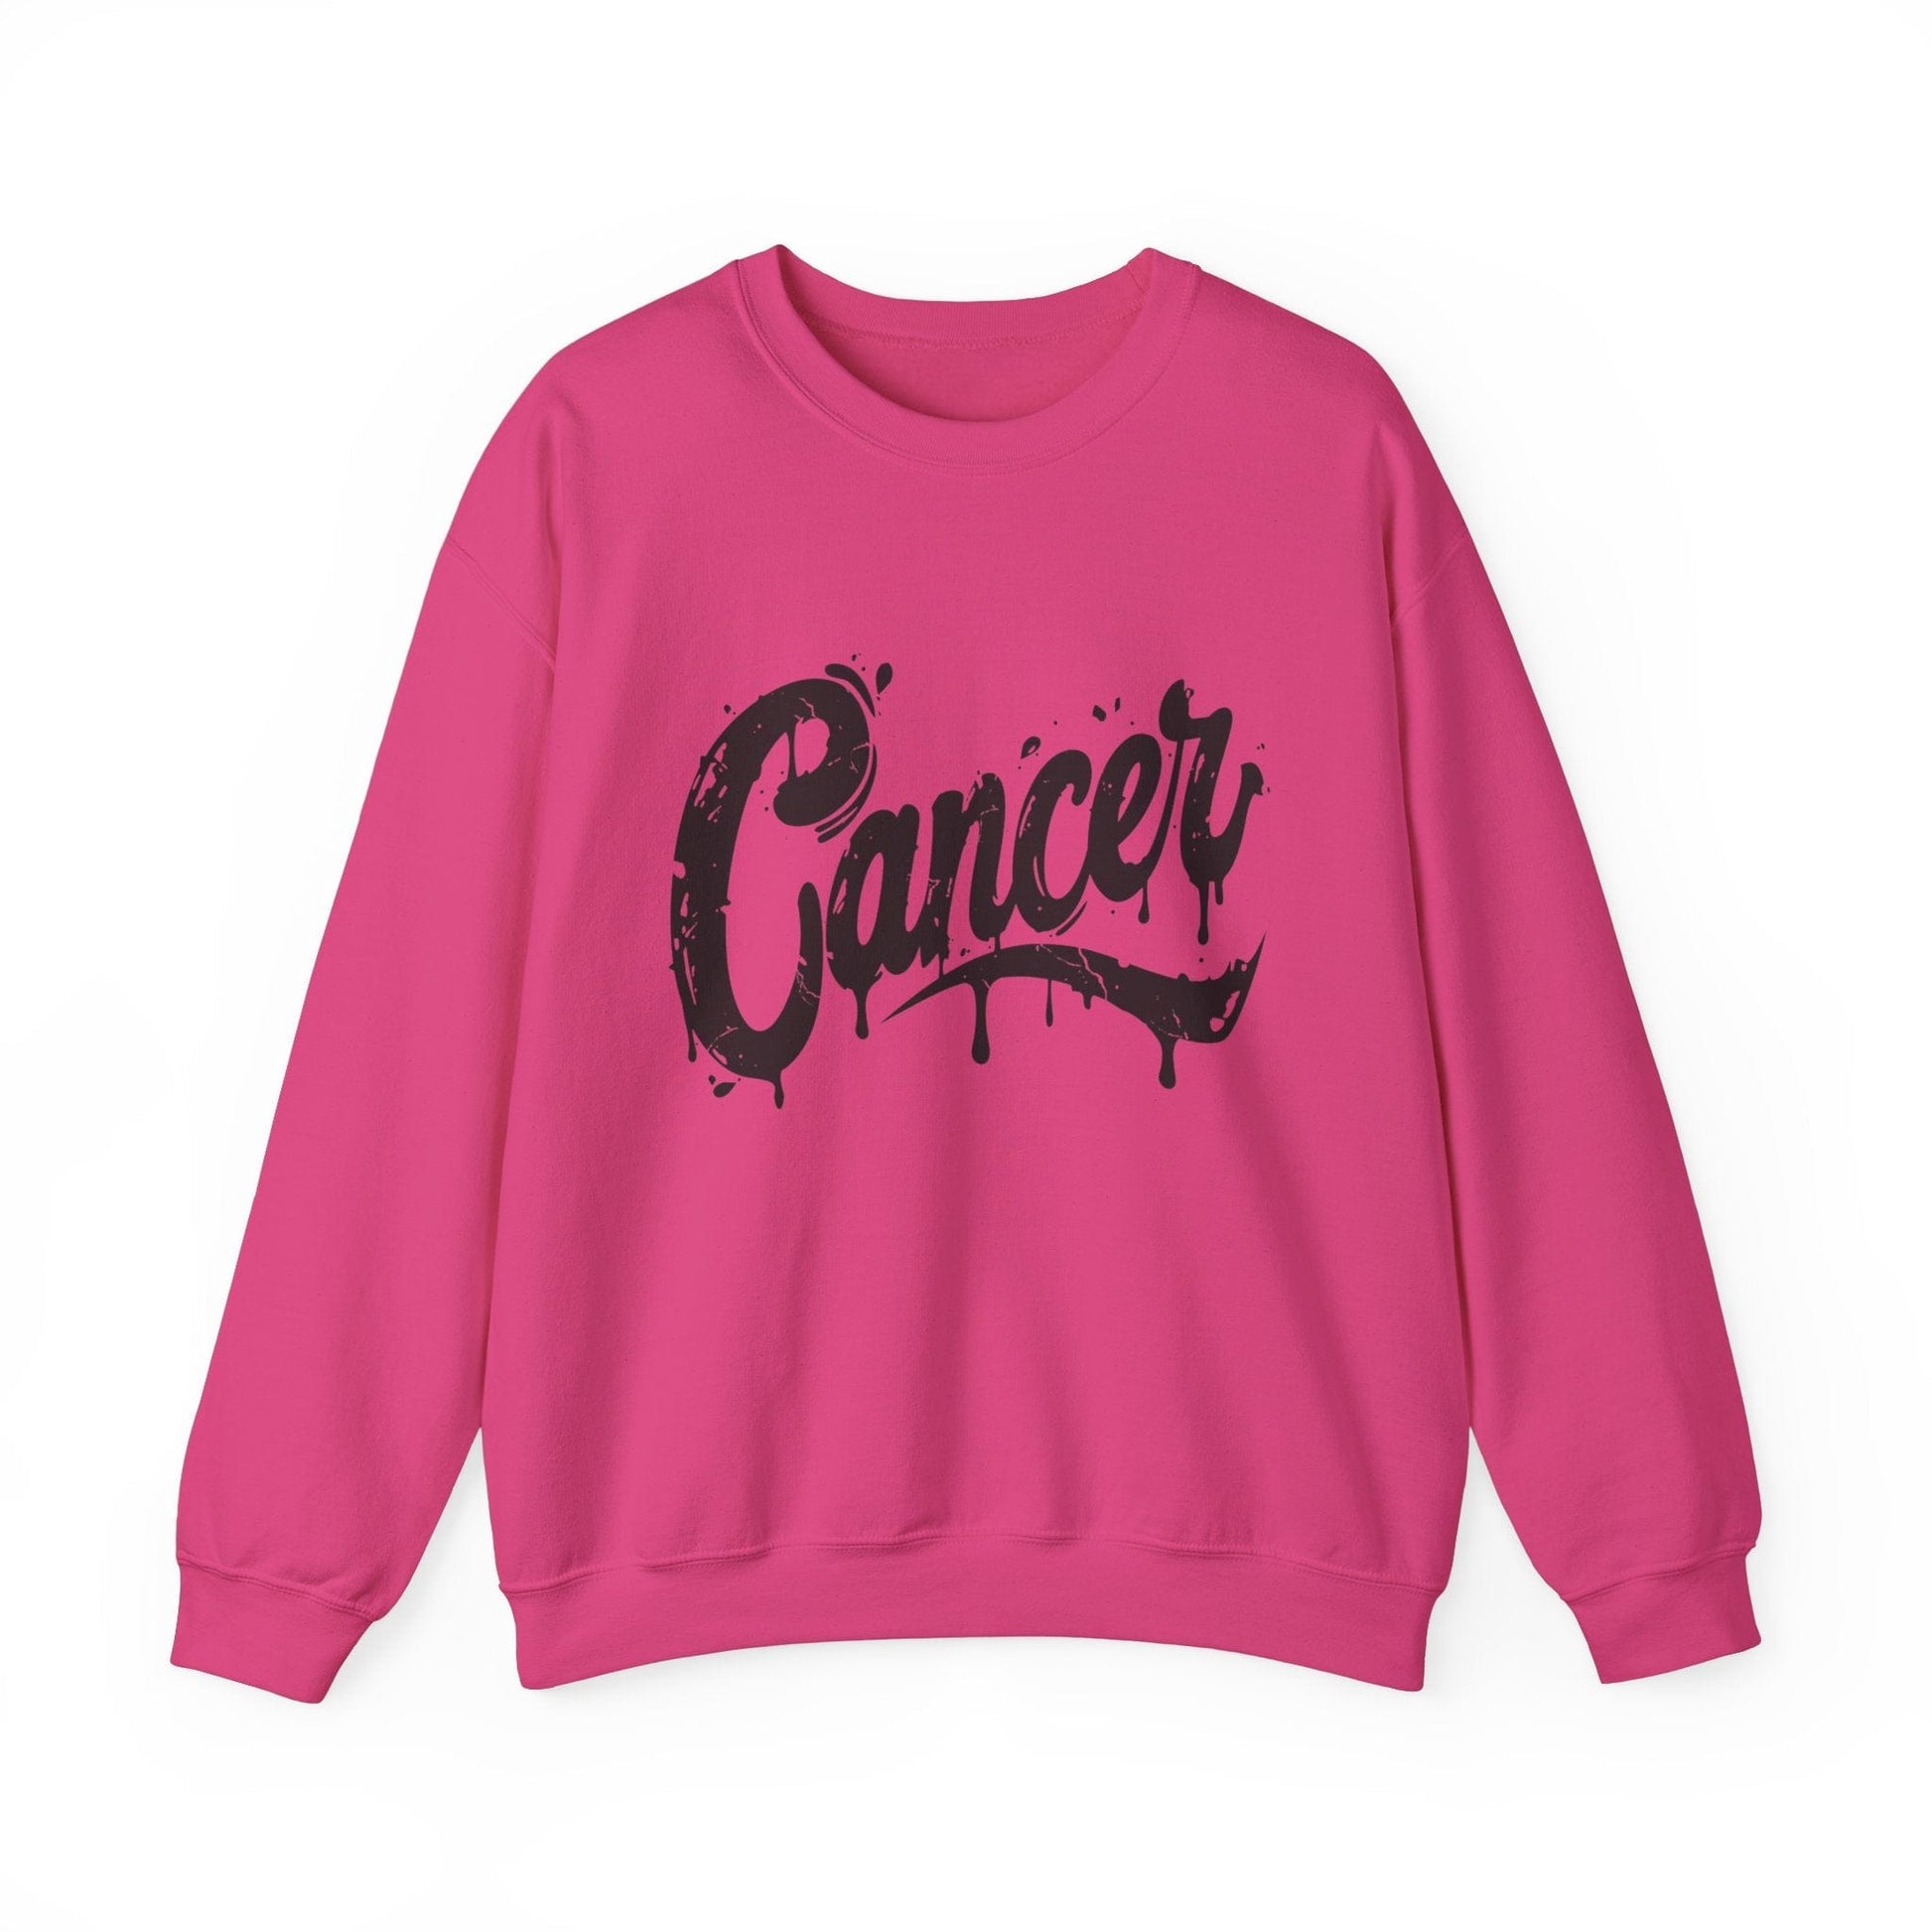 Sweatshirt S / Heliconia Tidal Emotion Cancer Sweater: Comfort in the Currents